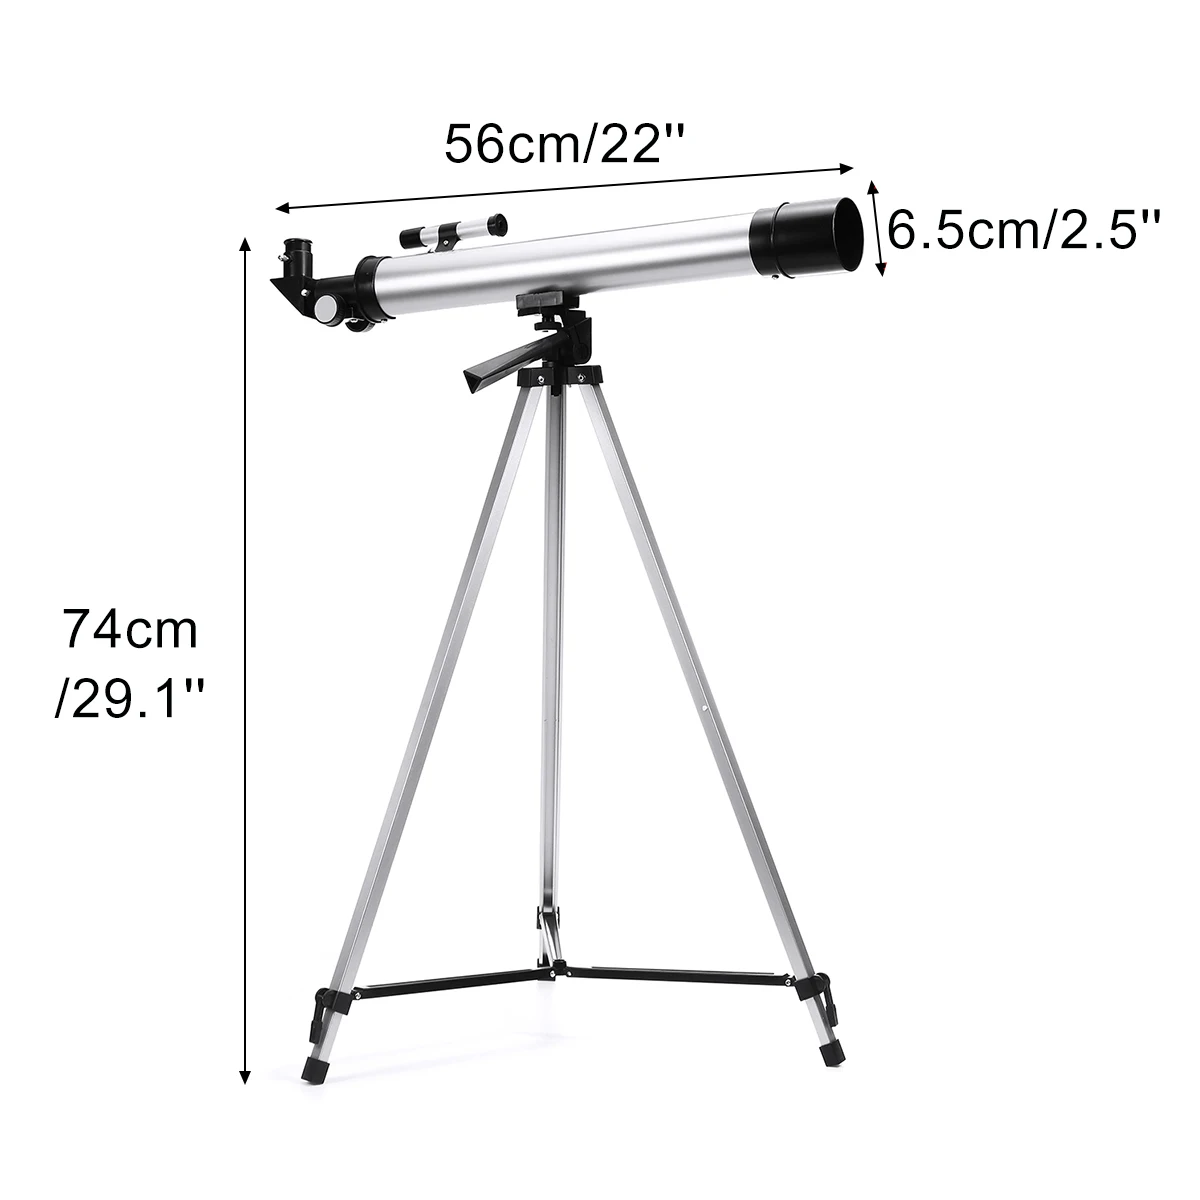 

Visionking Refraction Astronomical Telescope With Tripod Professional Monocular Telescopio Space Observation Spotting Scope